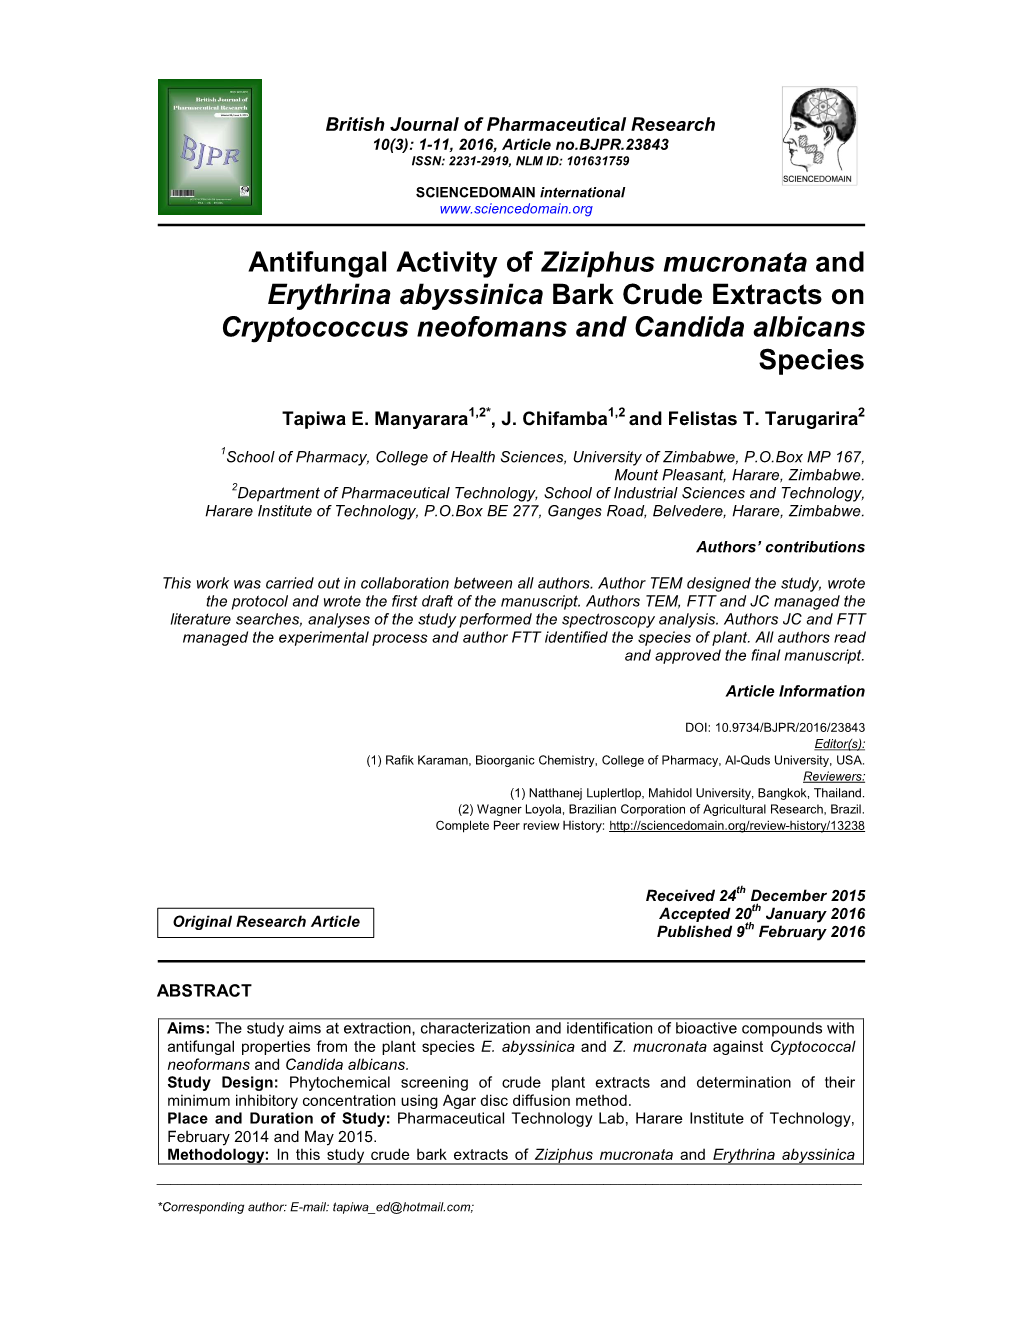 Antifungal Activity of Ziziphus Mucronata and Erythrina Abyssinica Bark Crude Extracts on Cryptococcus Neofomans and Candida Albicans Species